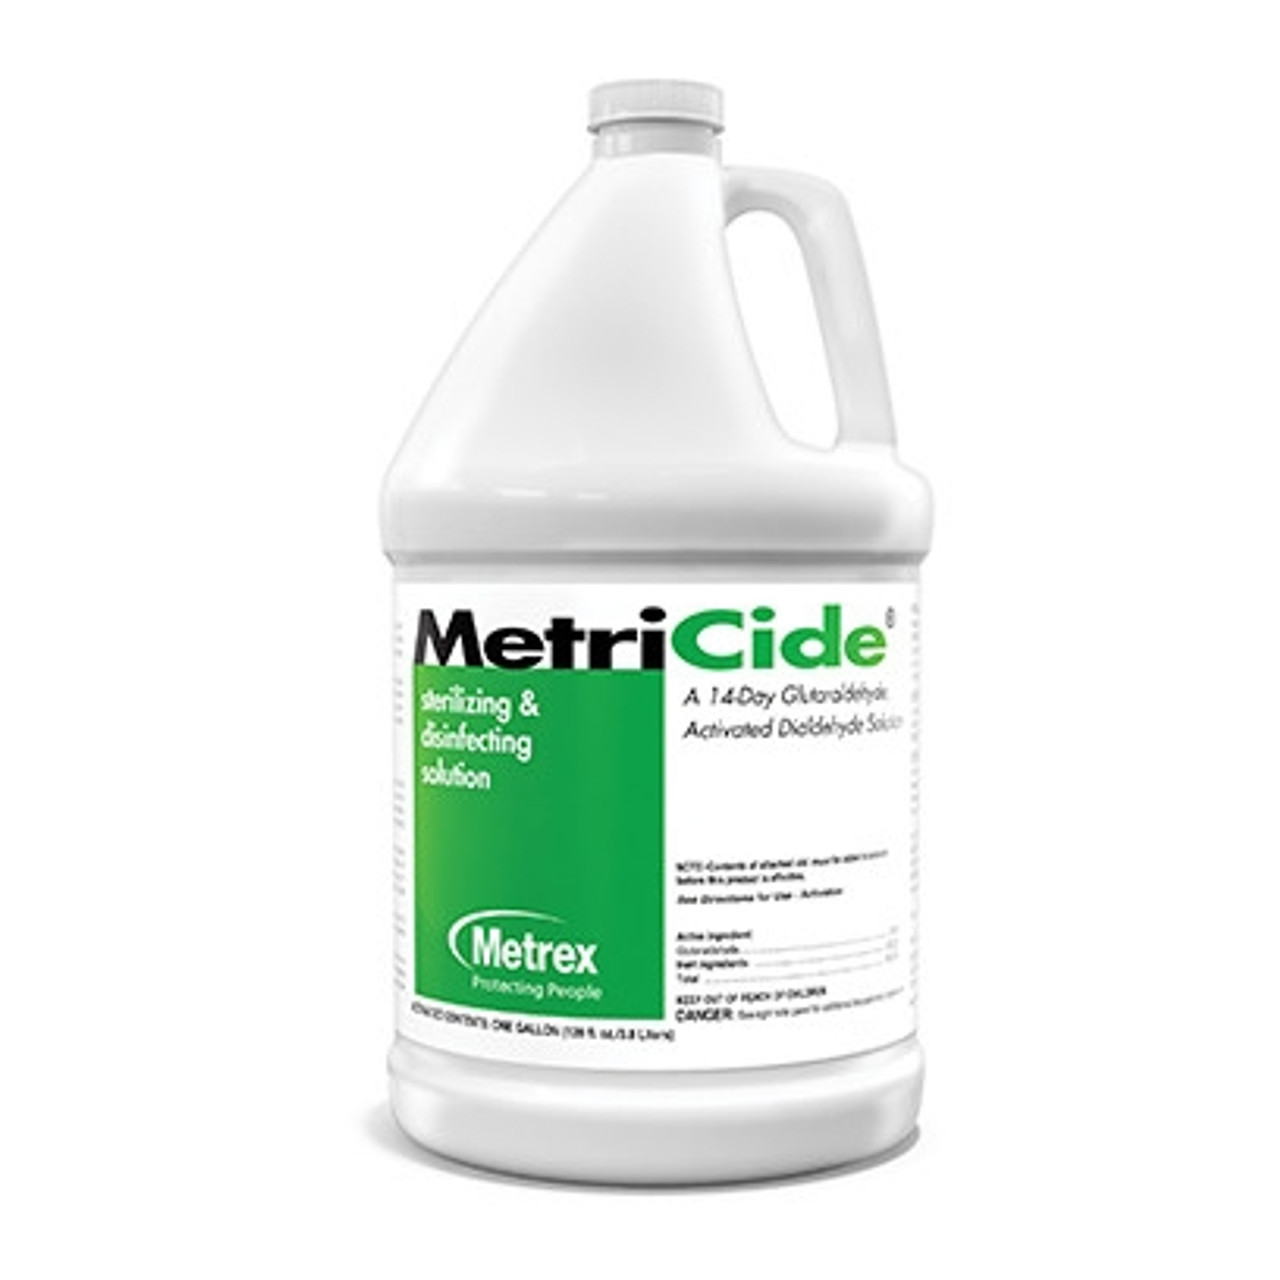 Metrex 11-1401 METRICIDE DISINFECTANT 14 DAY, 2.6% buffered glutaraldehyde, 1 gal, Case of 4, Case